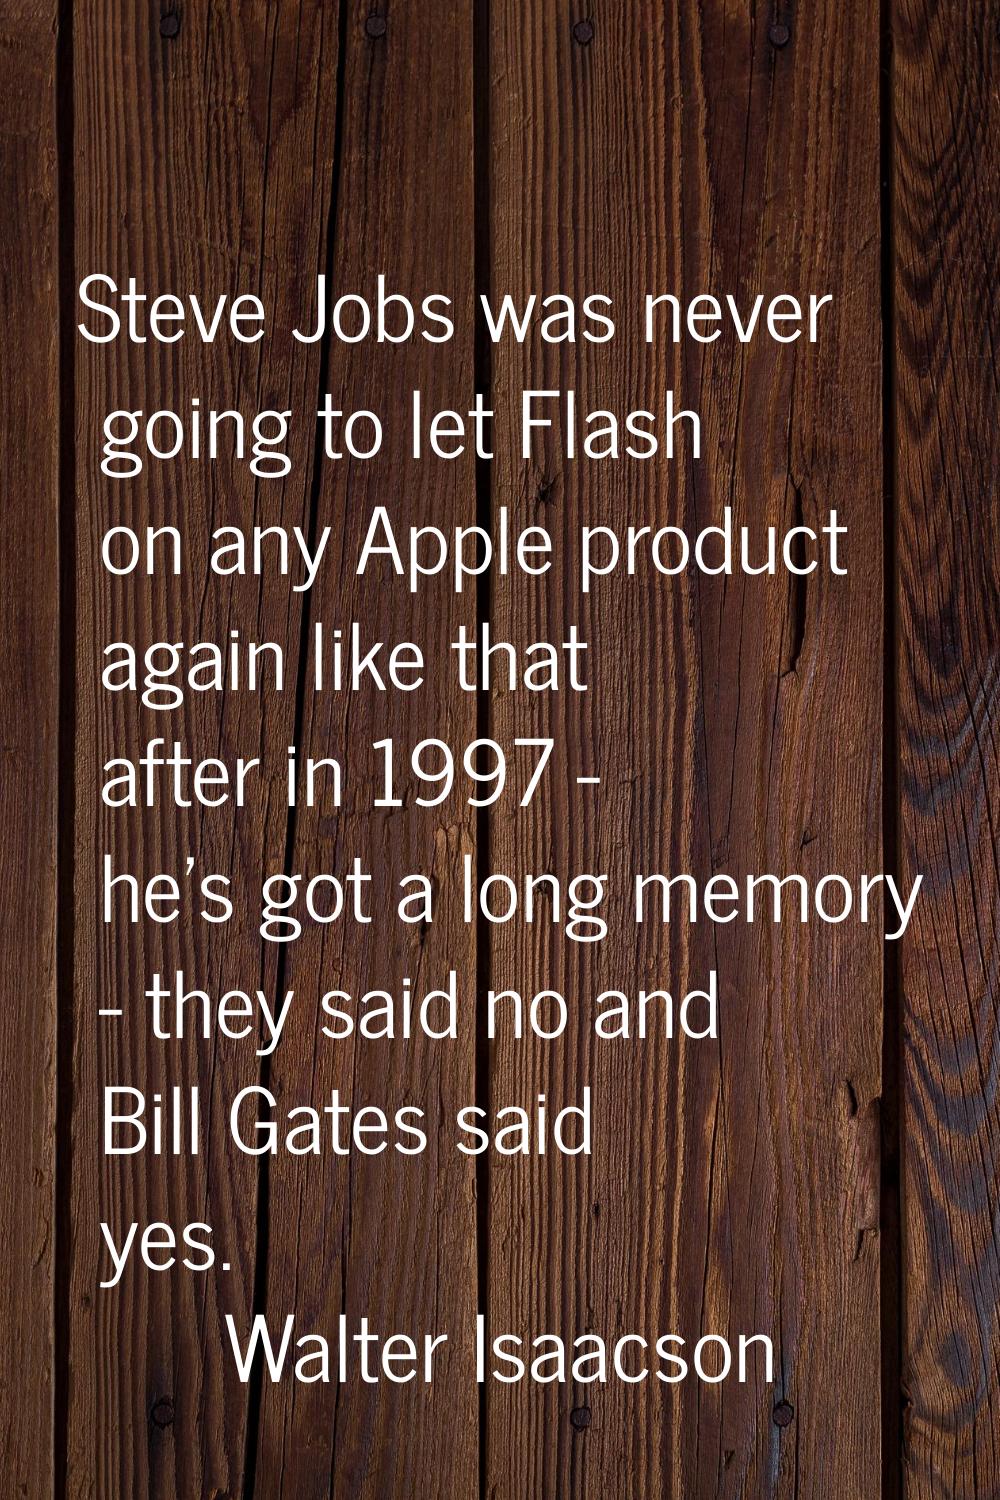 Steve Jobs was never going to let Flash on any Apple product again like that after in 1997 - he's g